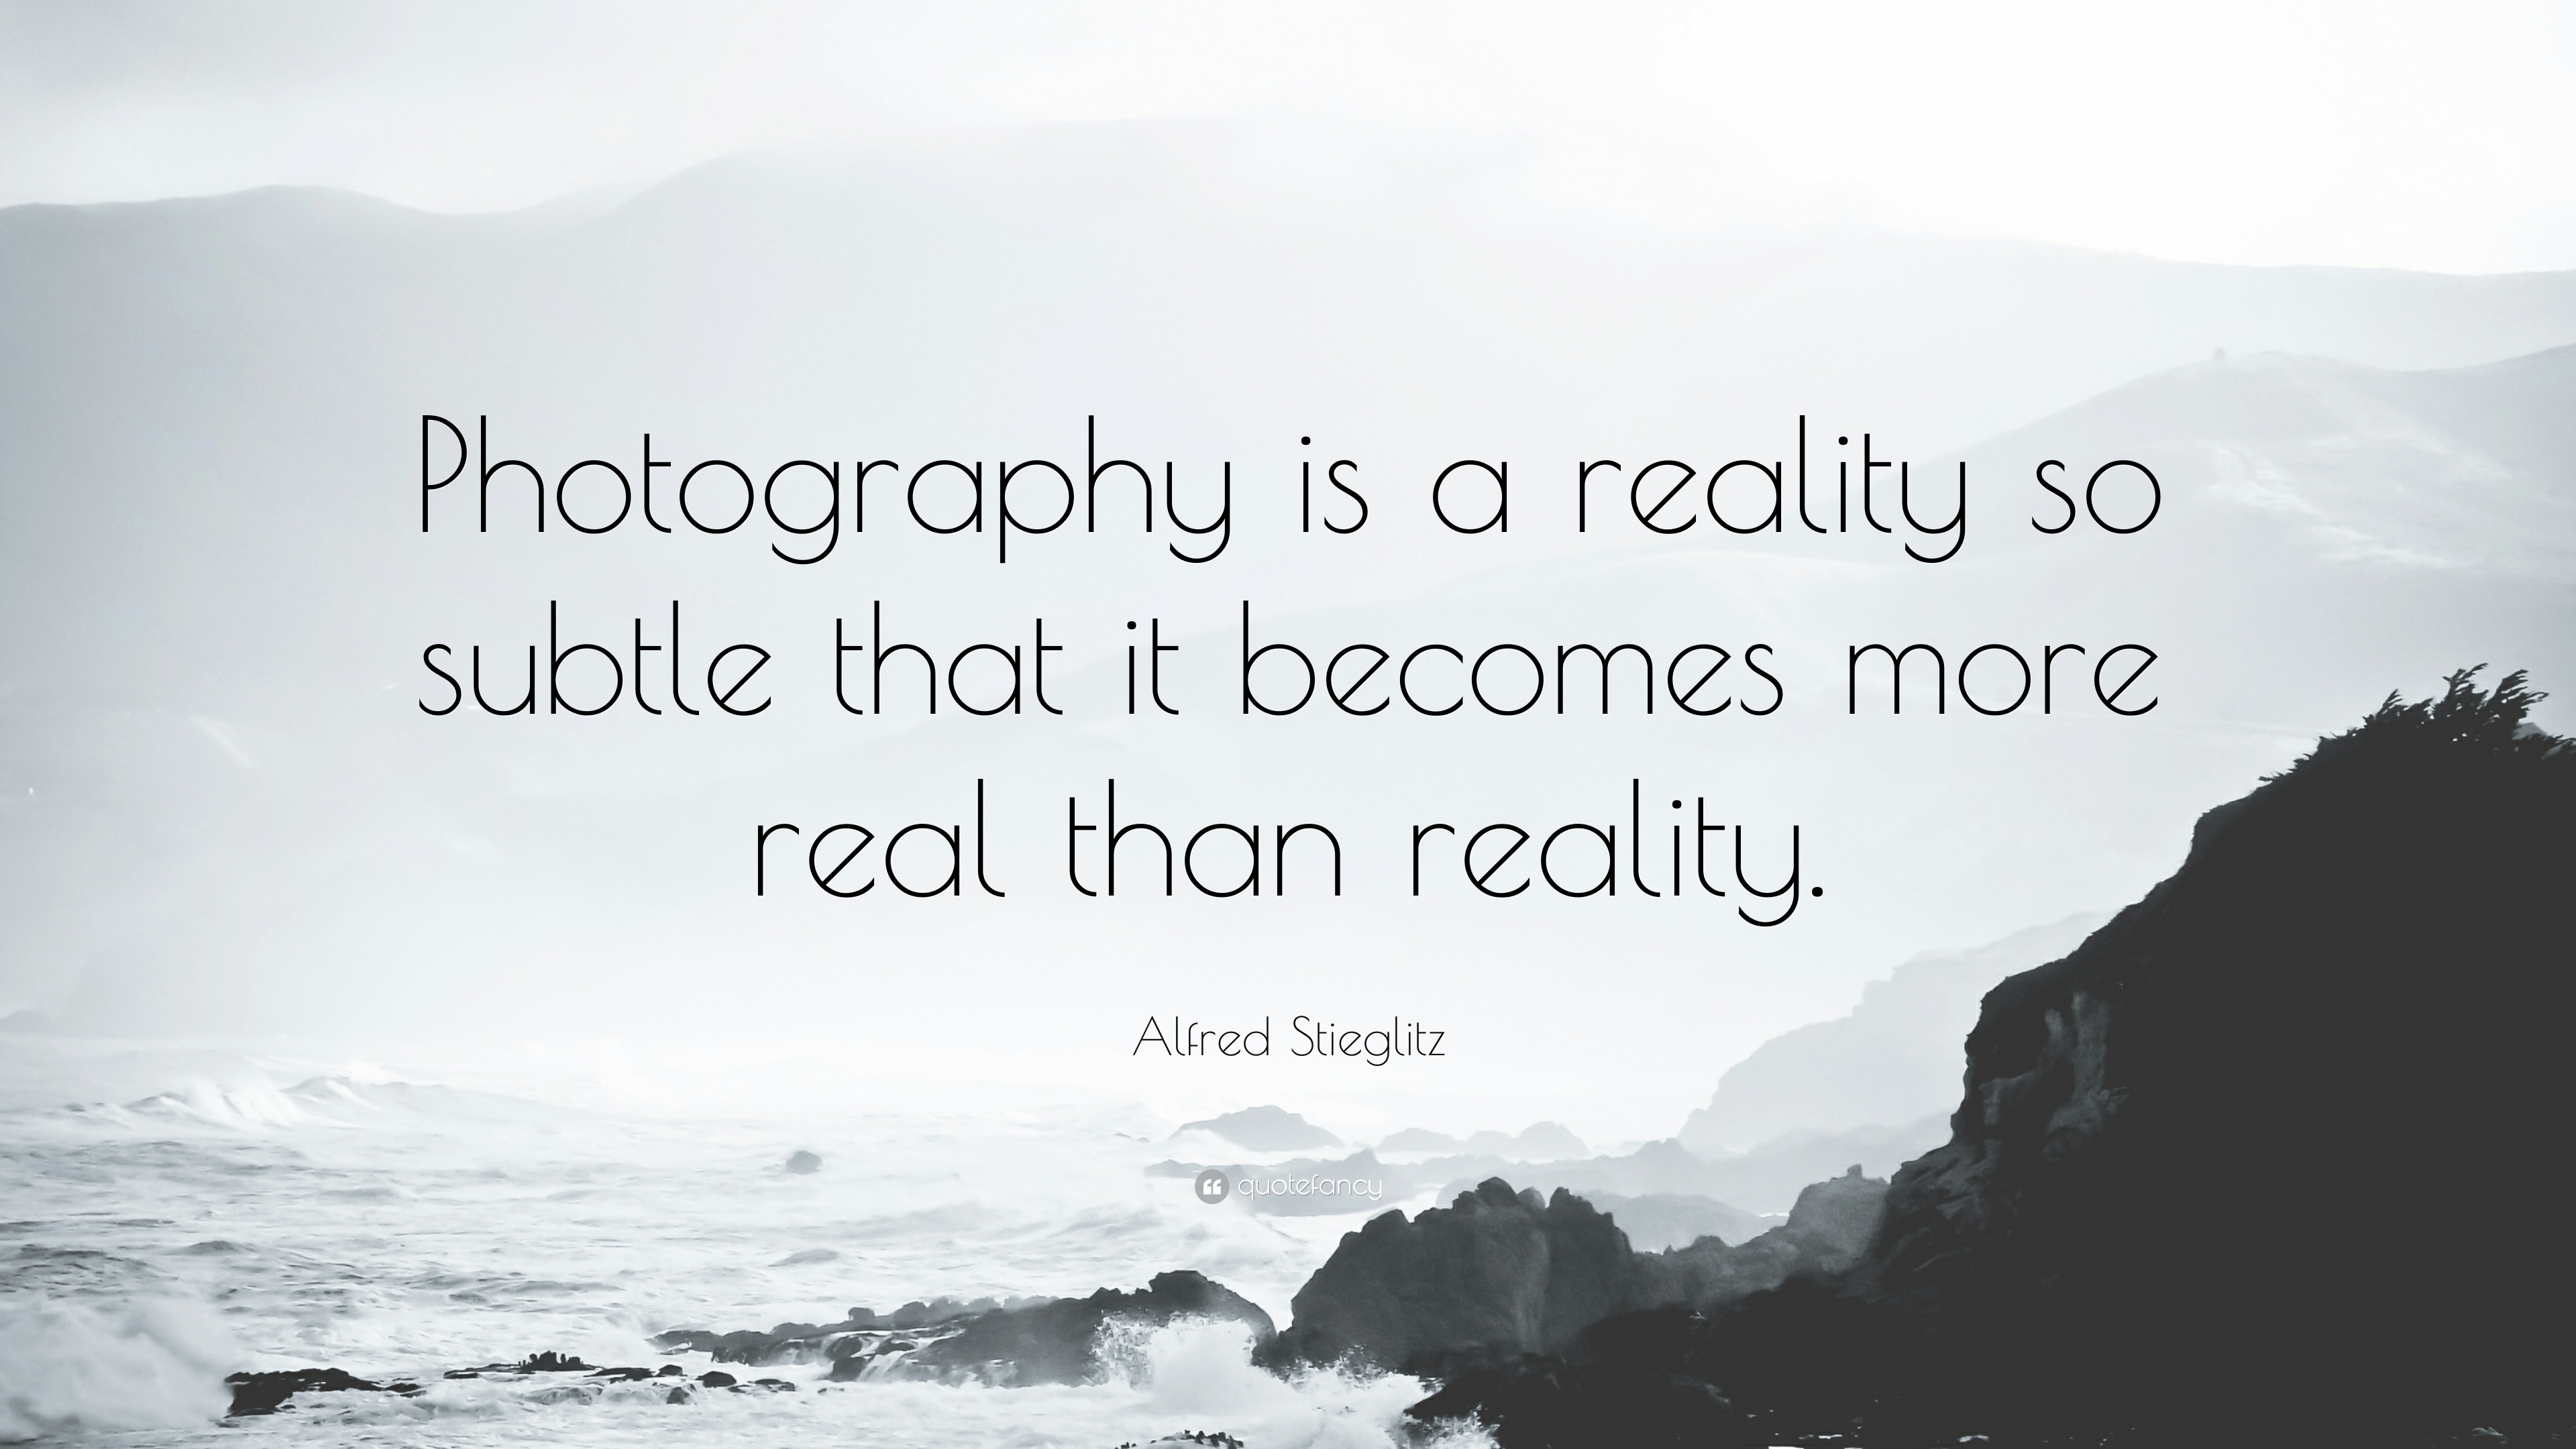 Photography is a reality so subtle that it becomes more real than reality. Alfred Stieglitz